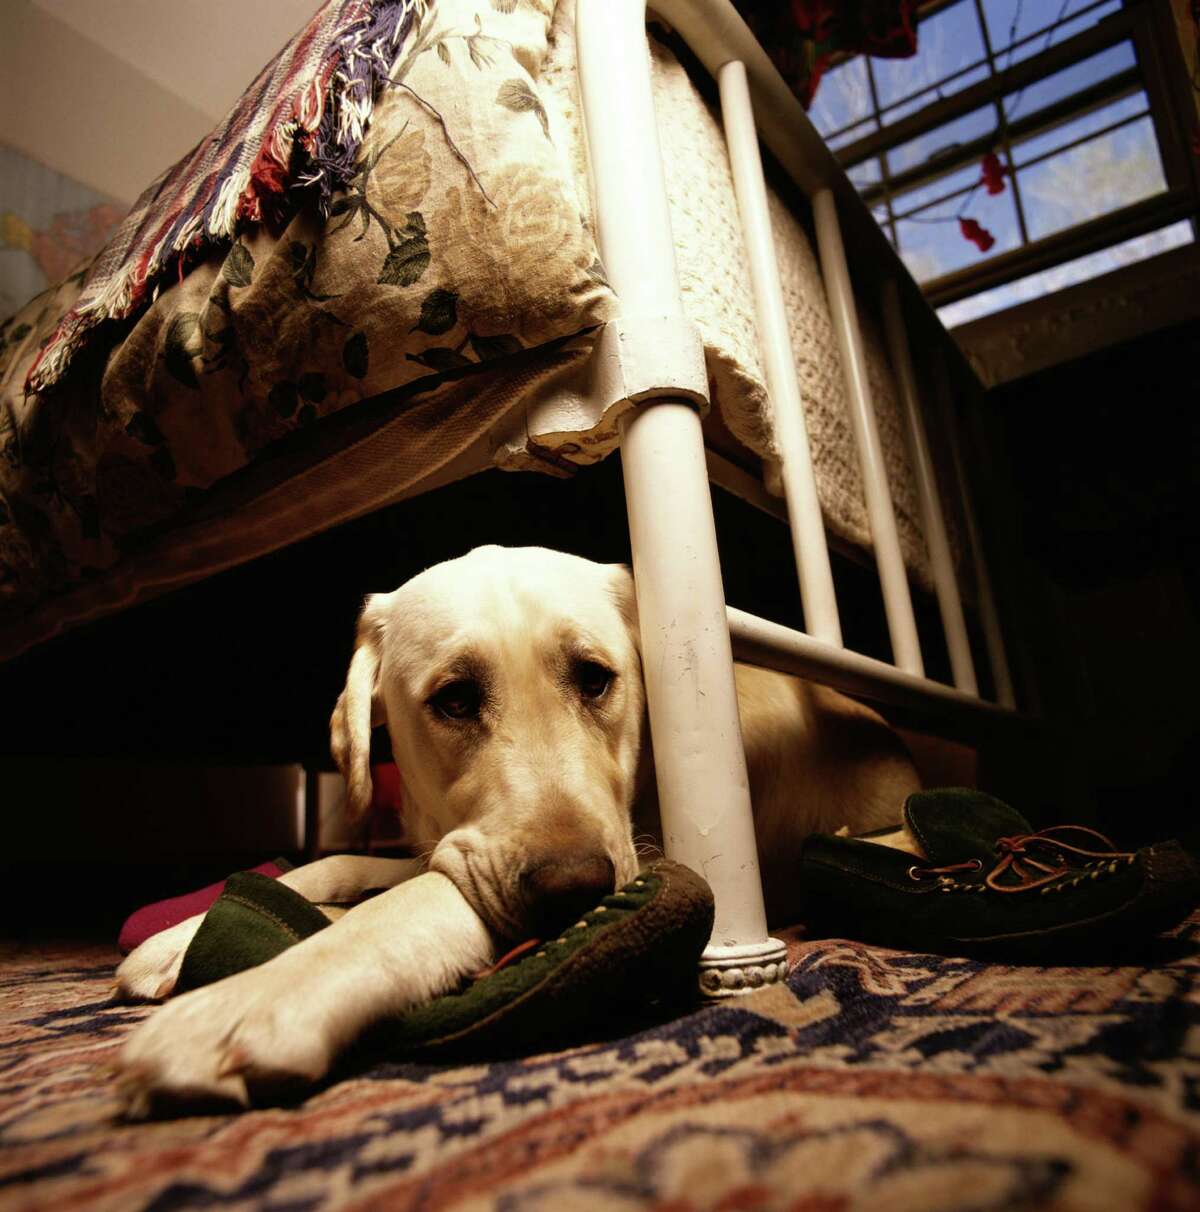 Most dogs don't relish being exposed in an open room. They prefer cavelike conditions that help them feel cozy and safe.